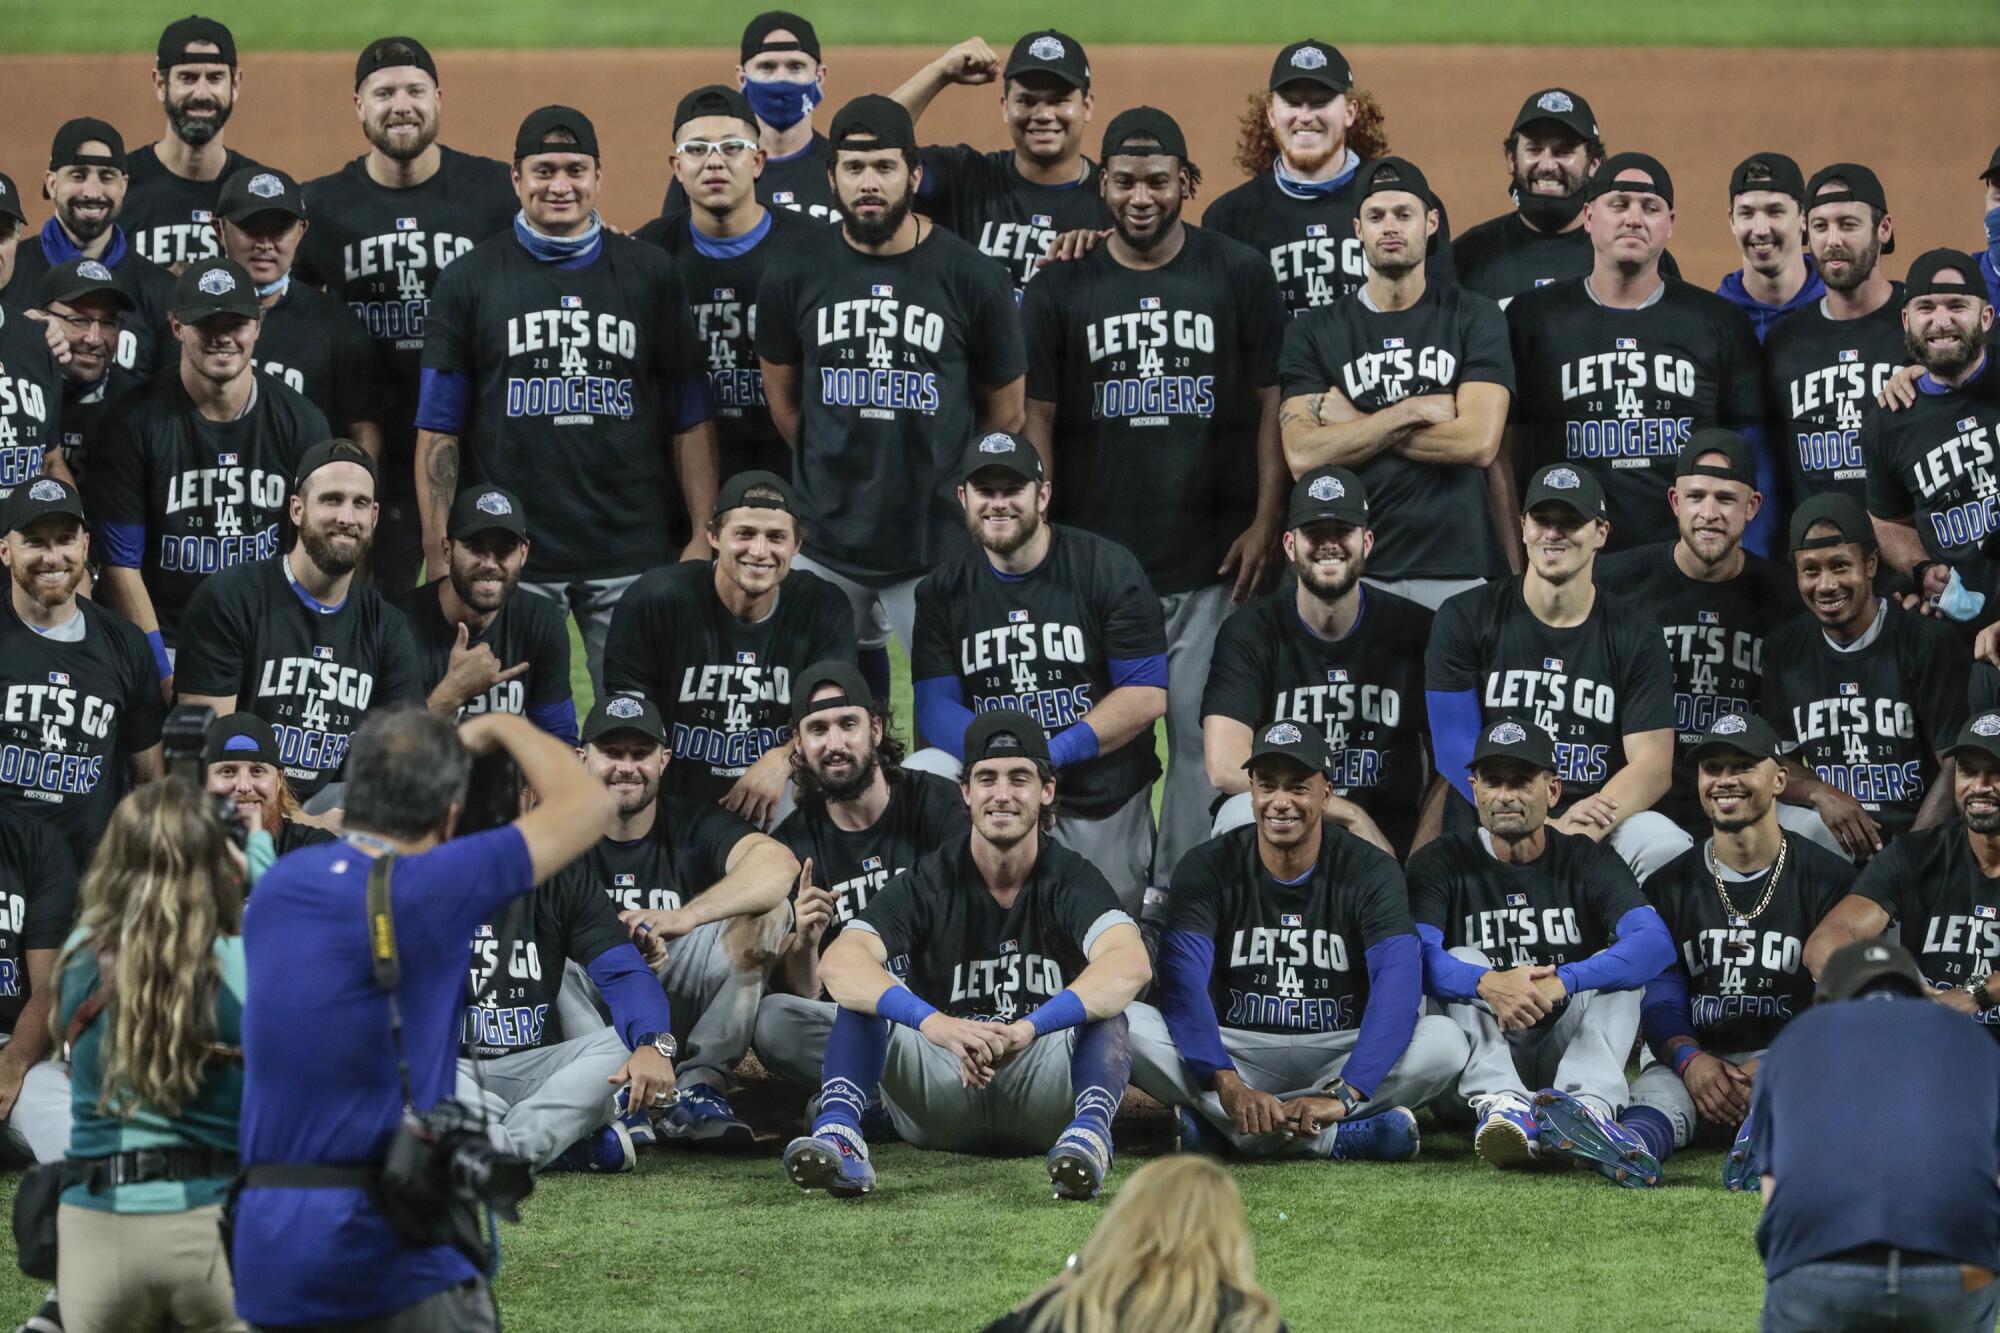 Dodgers players celebrate at Globe Life Field in Arlington, Texas, after sweeping the San Diego Padres.